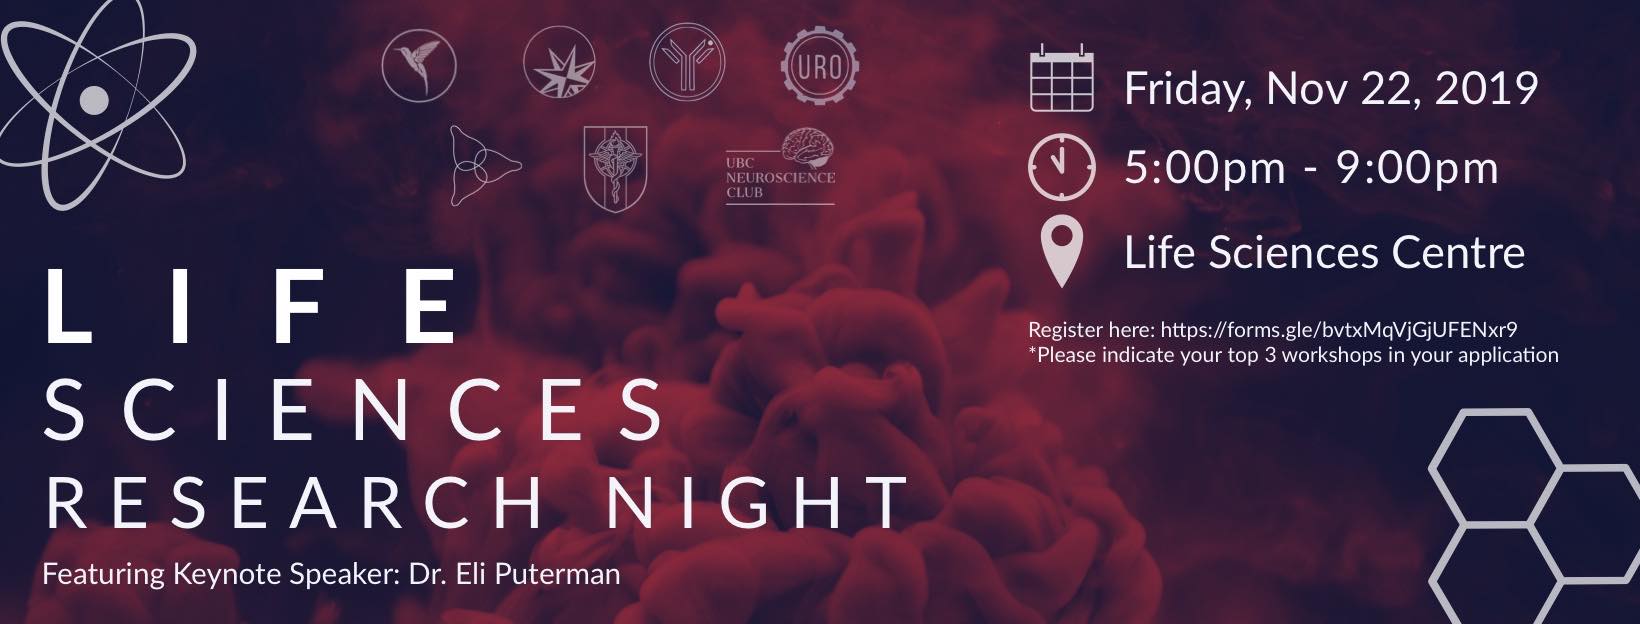 Life sciences research night 2019